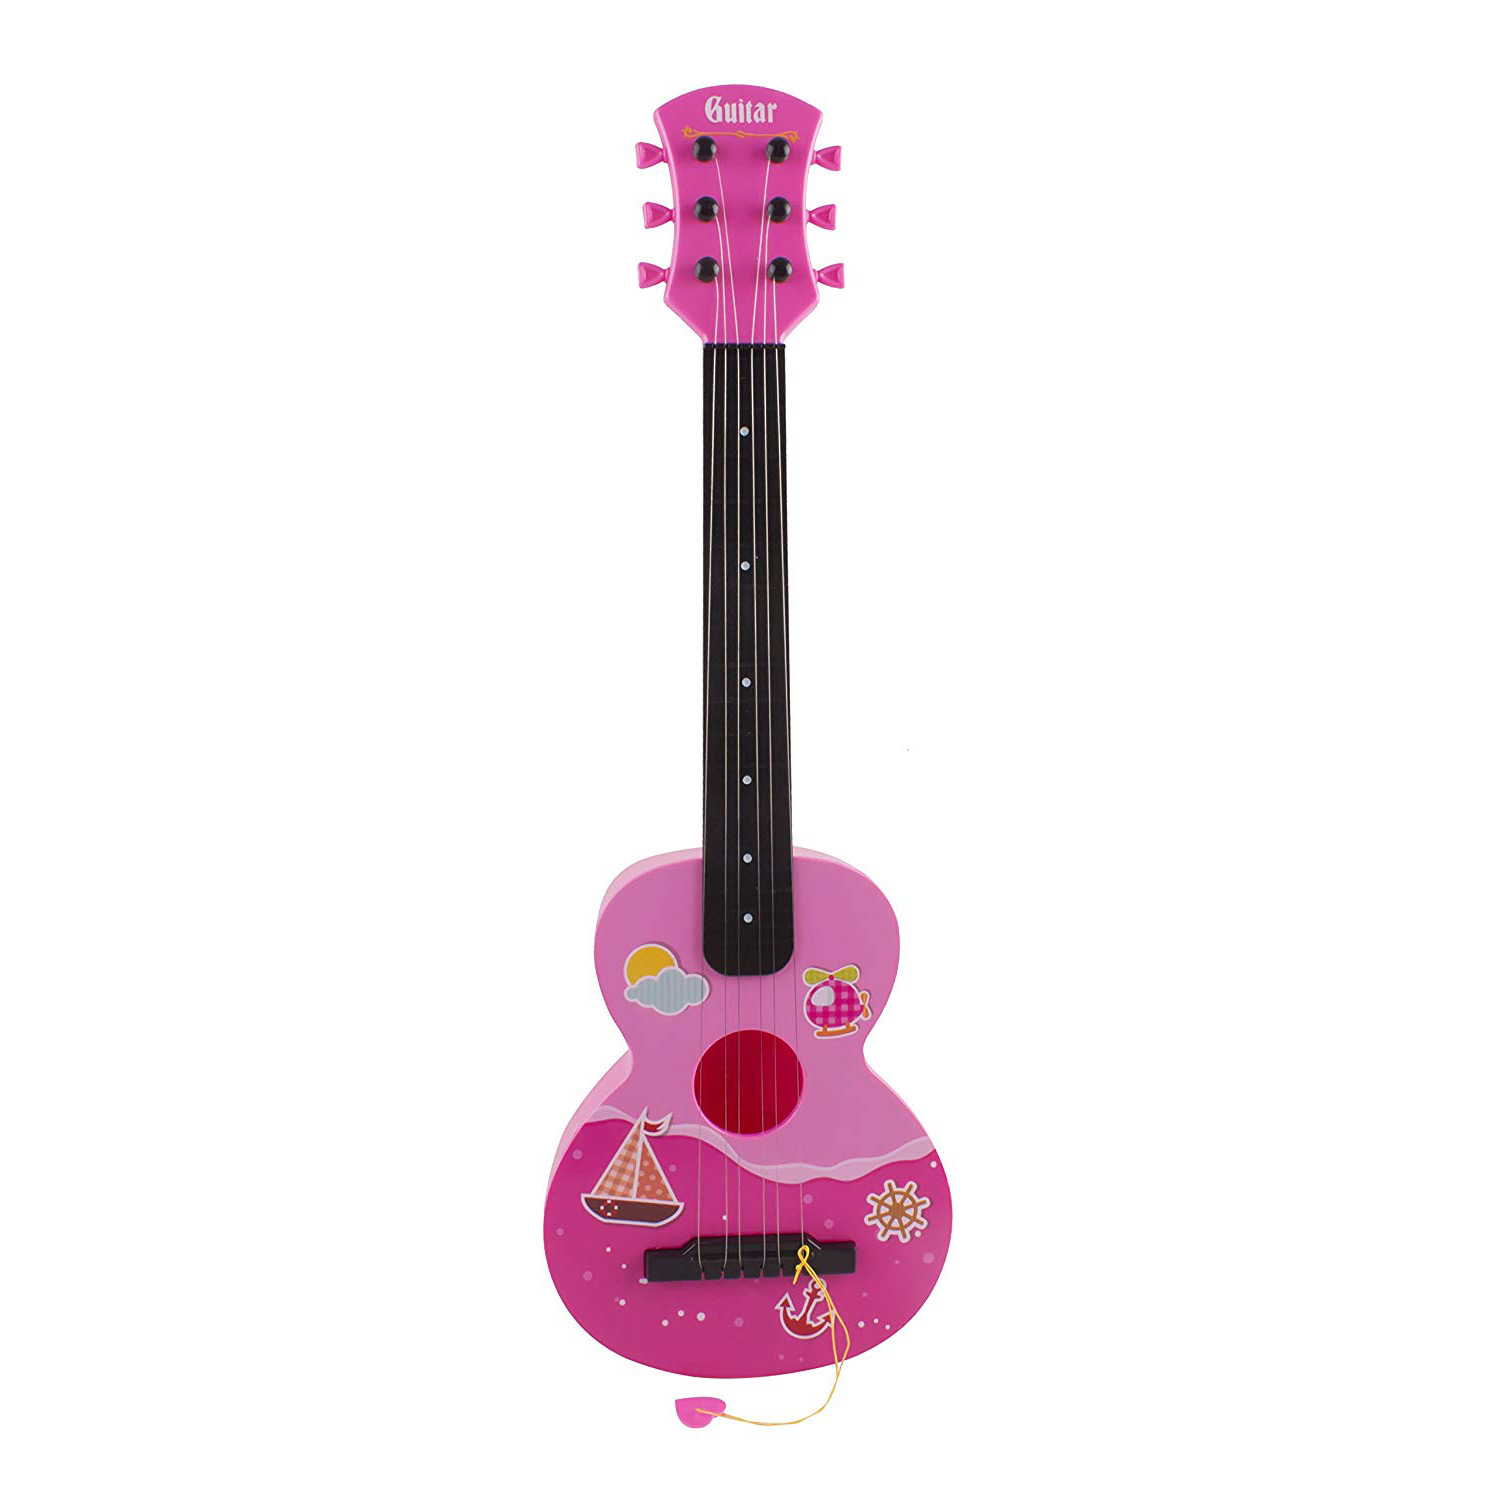 BRAND NEW KIDS TOY ROCKSTAR GUITAR AGES 3 AND UP 